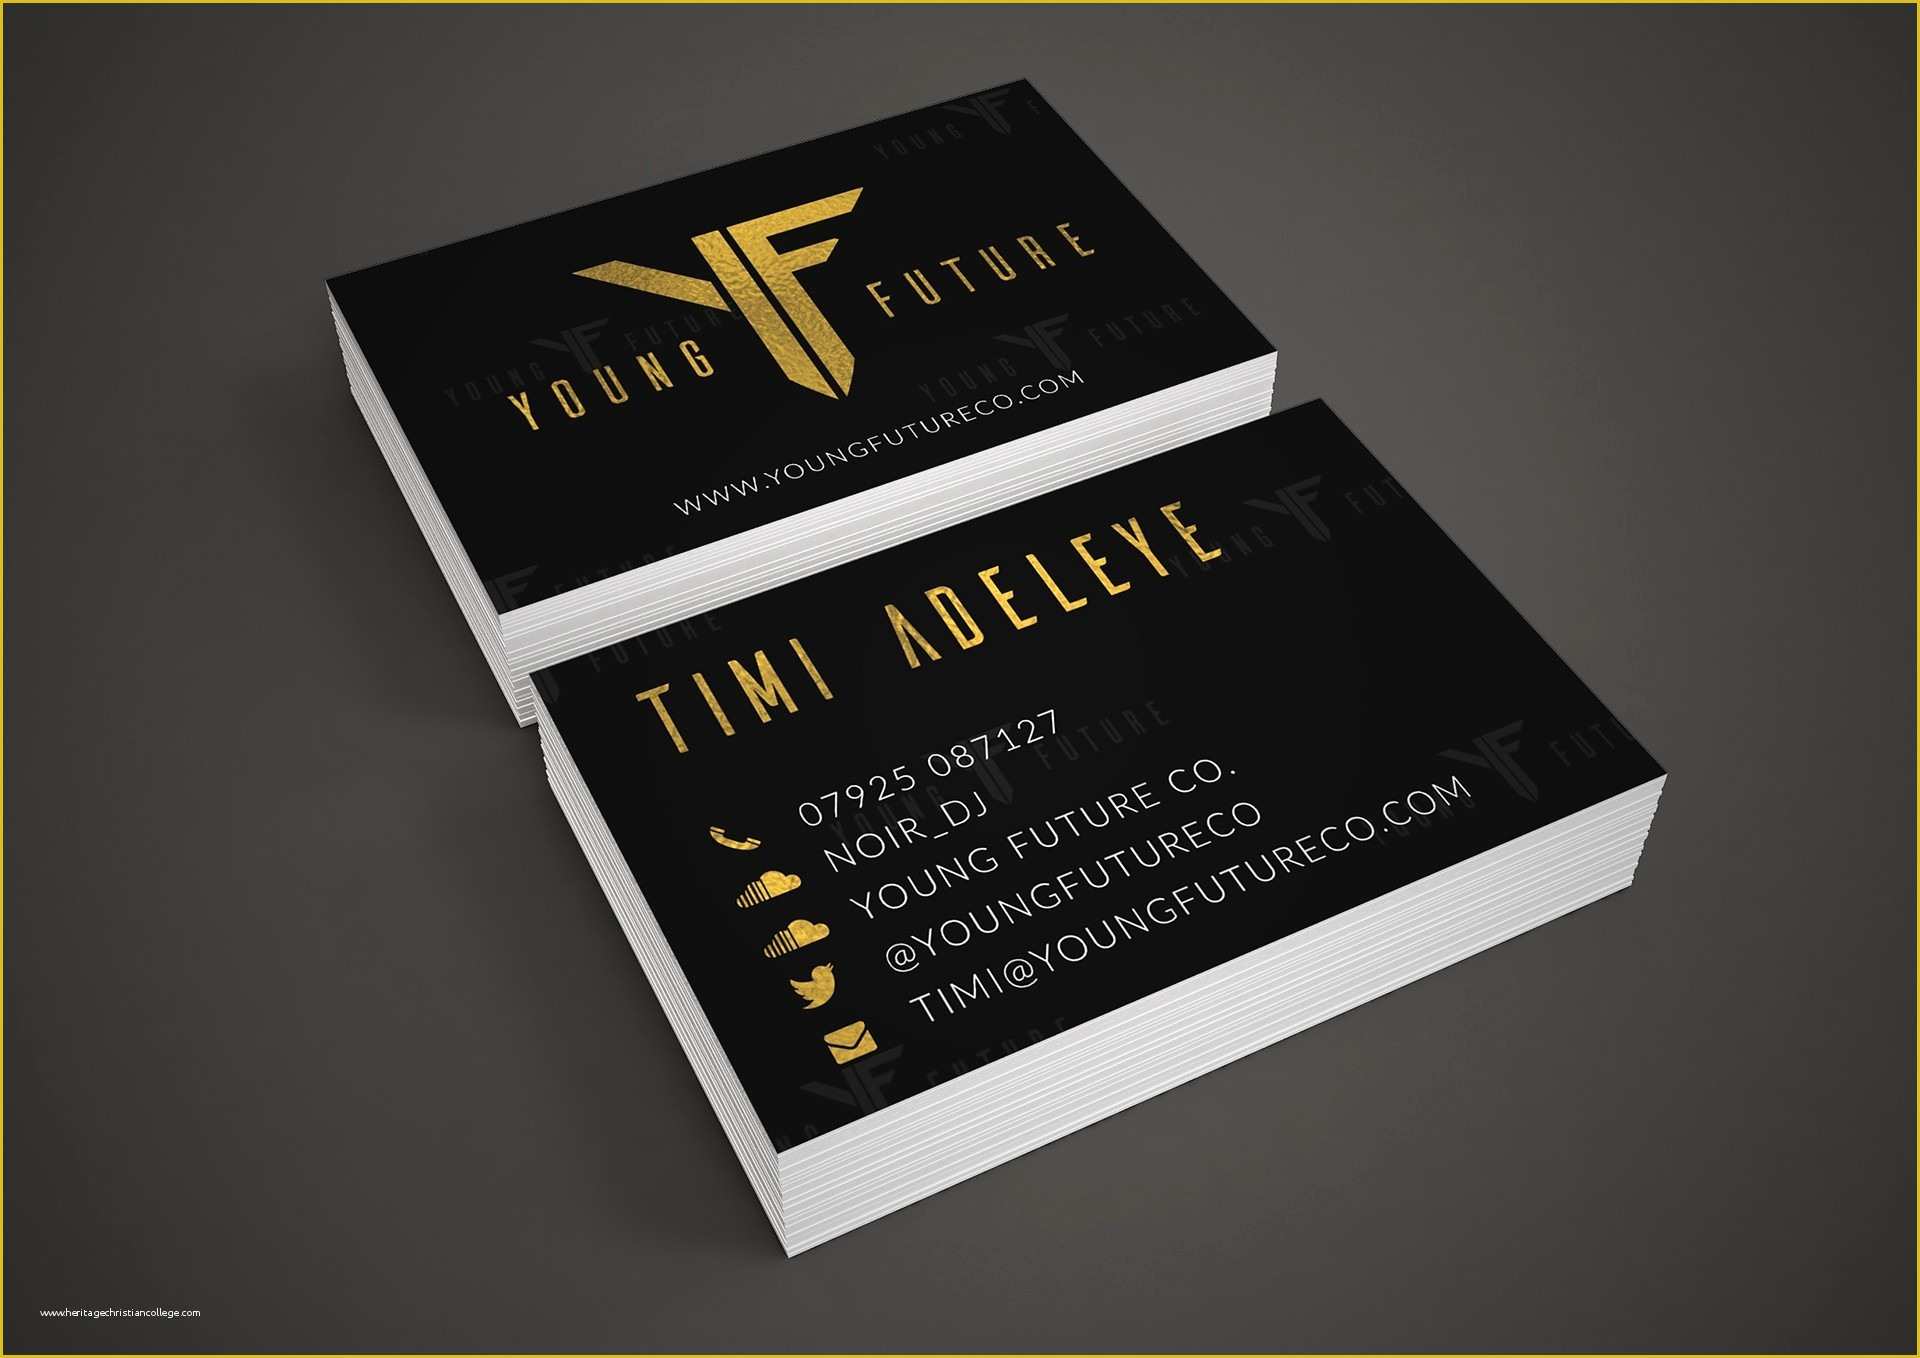 Band Business Card Templates Free Of Band Business Card Template New Alljc Co Page Business